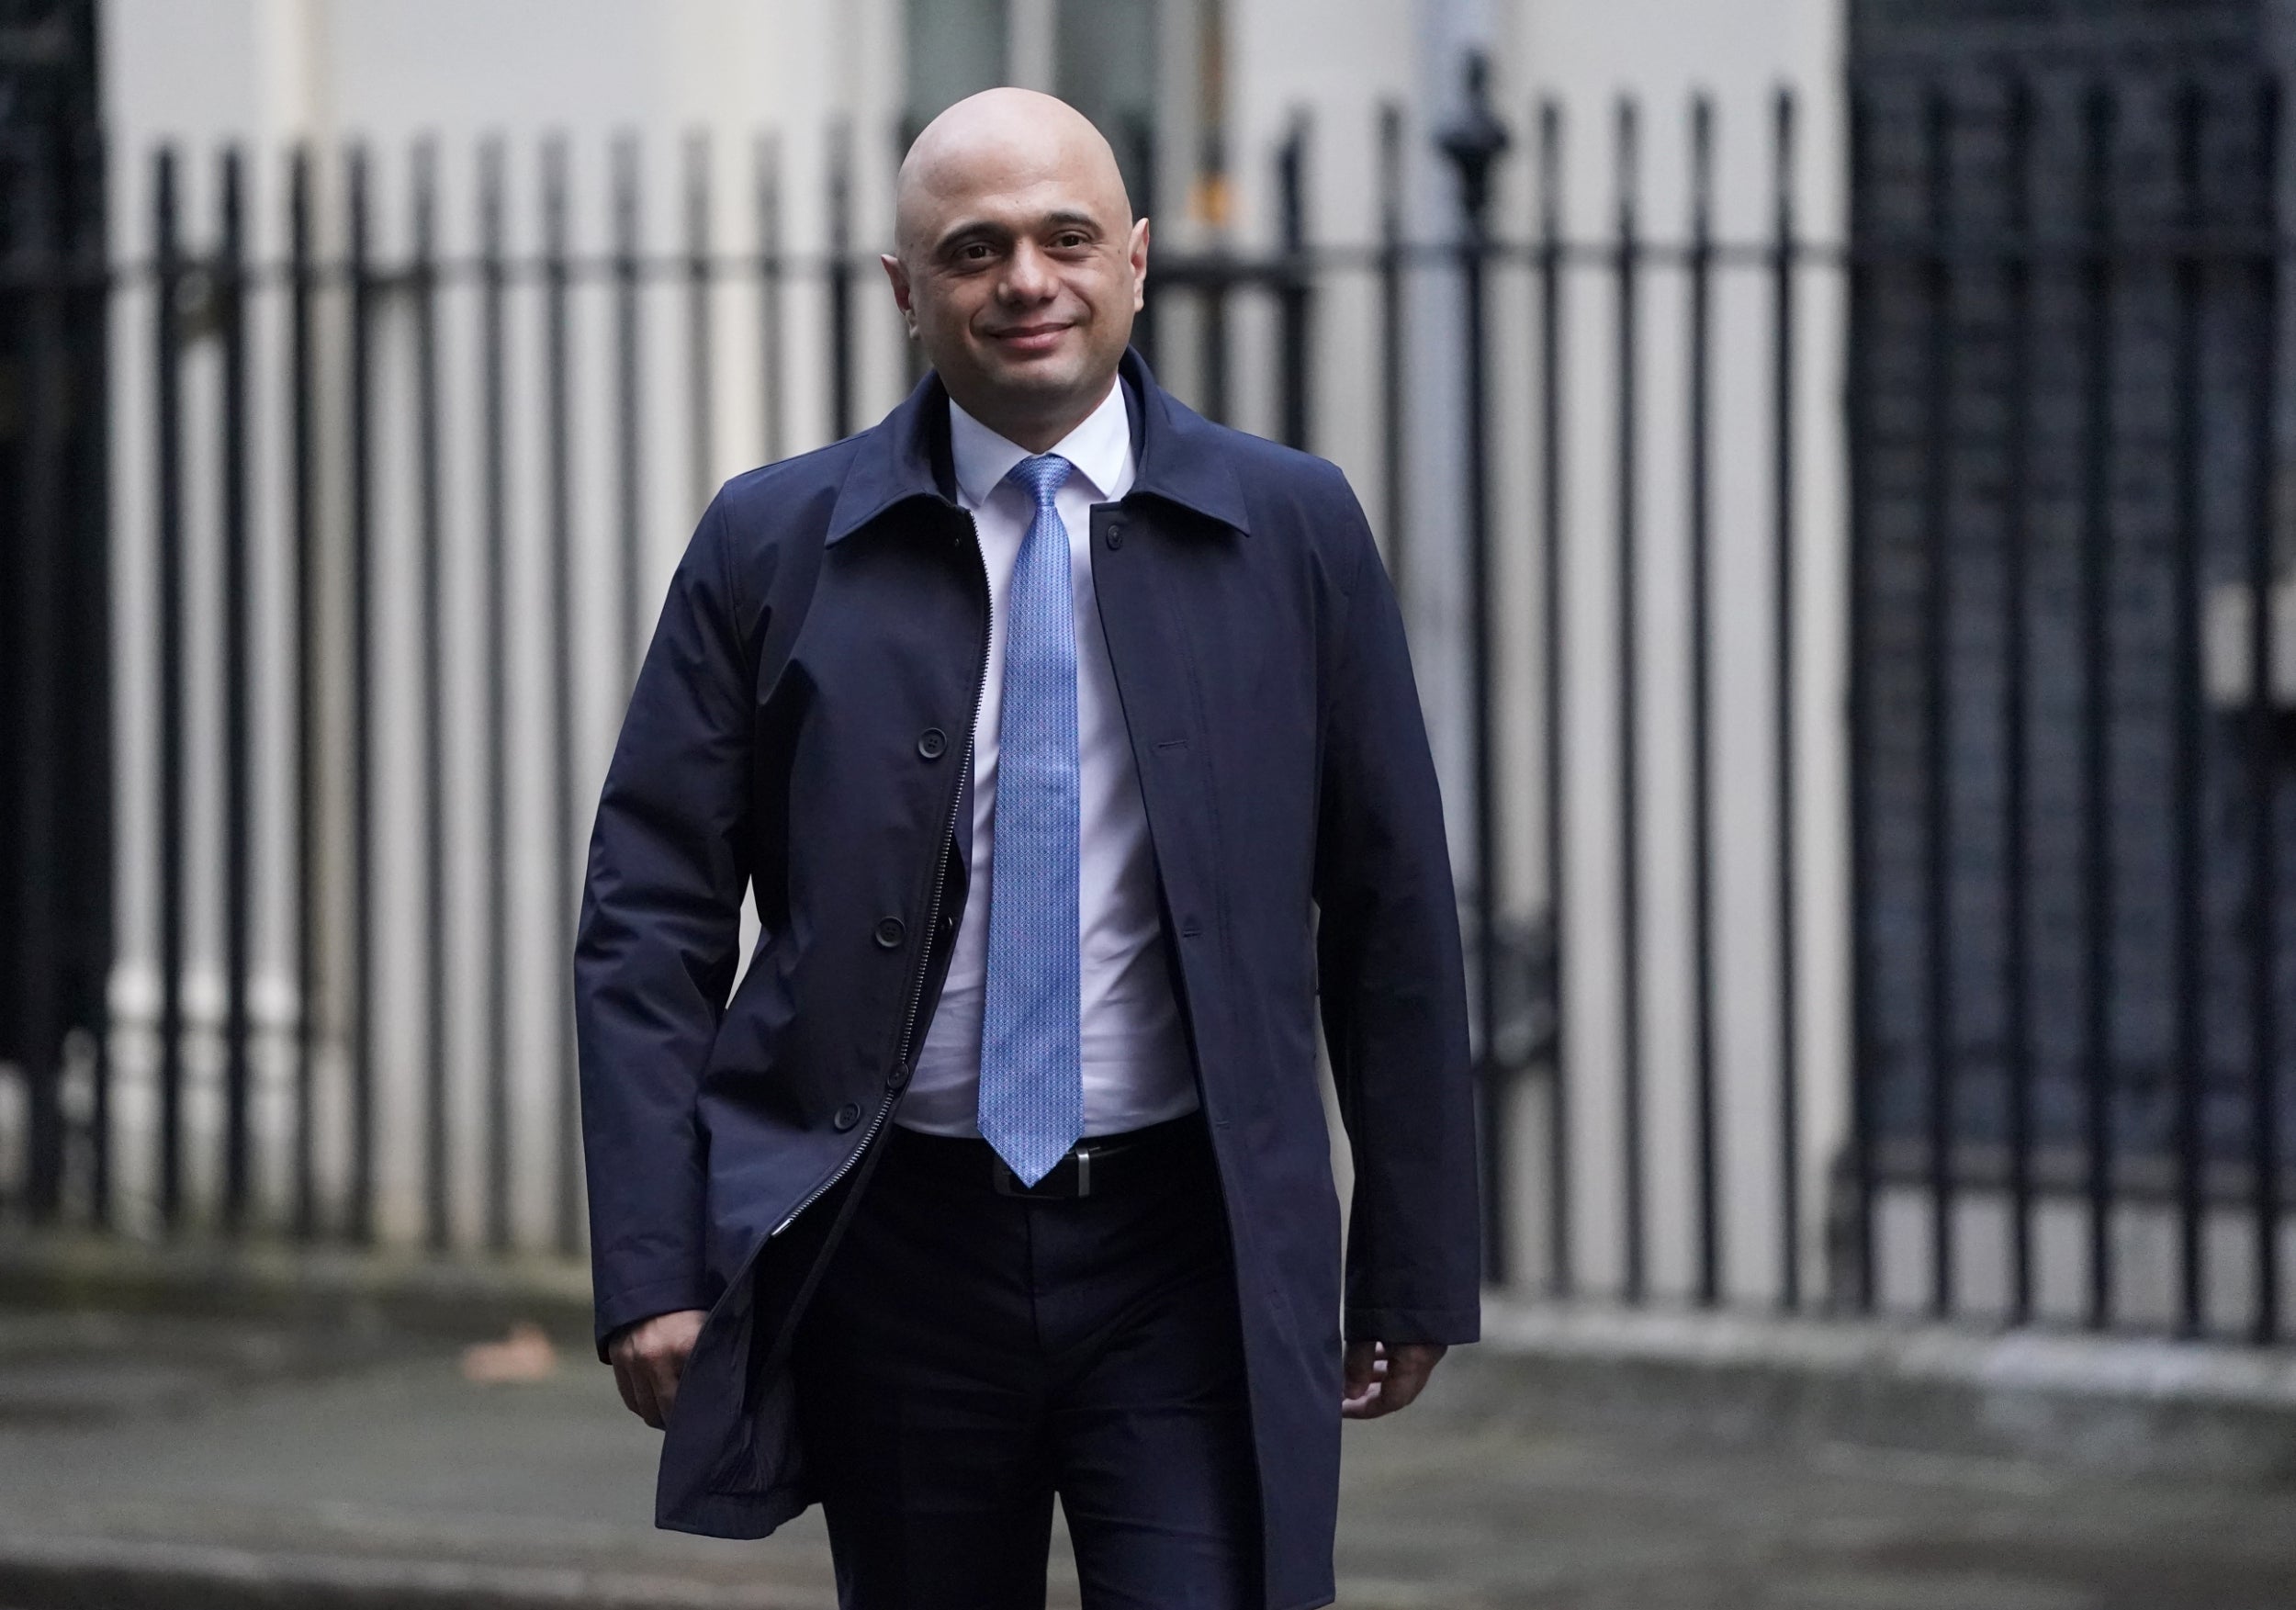 Sajid Javid has little reason to be optimistic during this fog of uncertainty